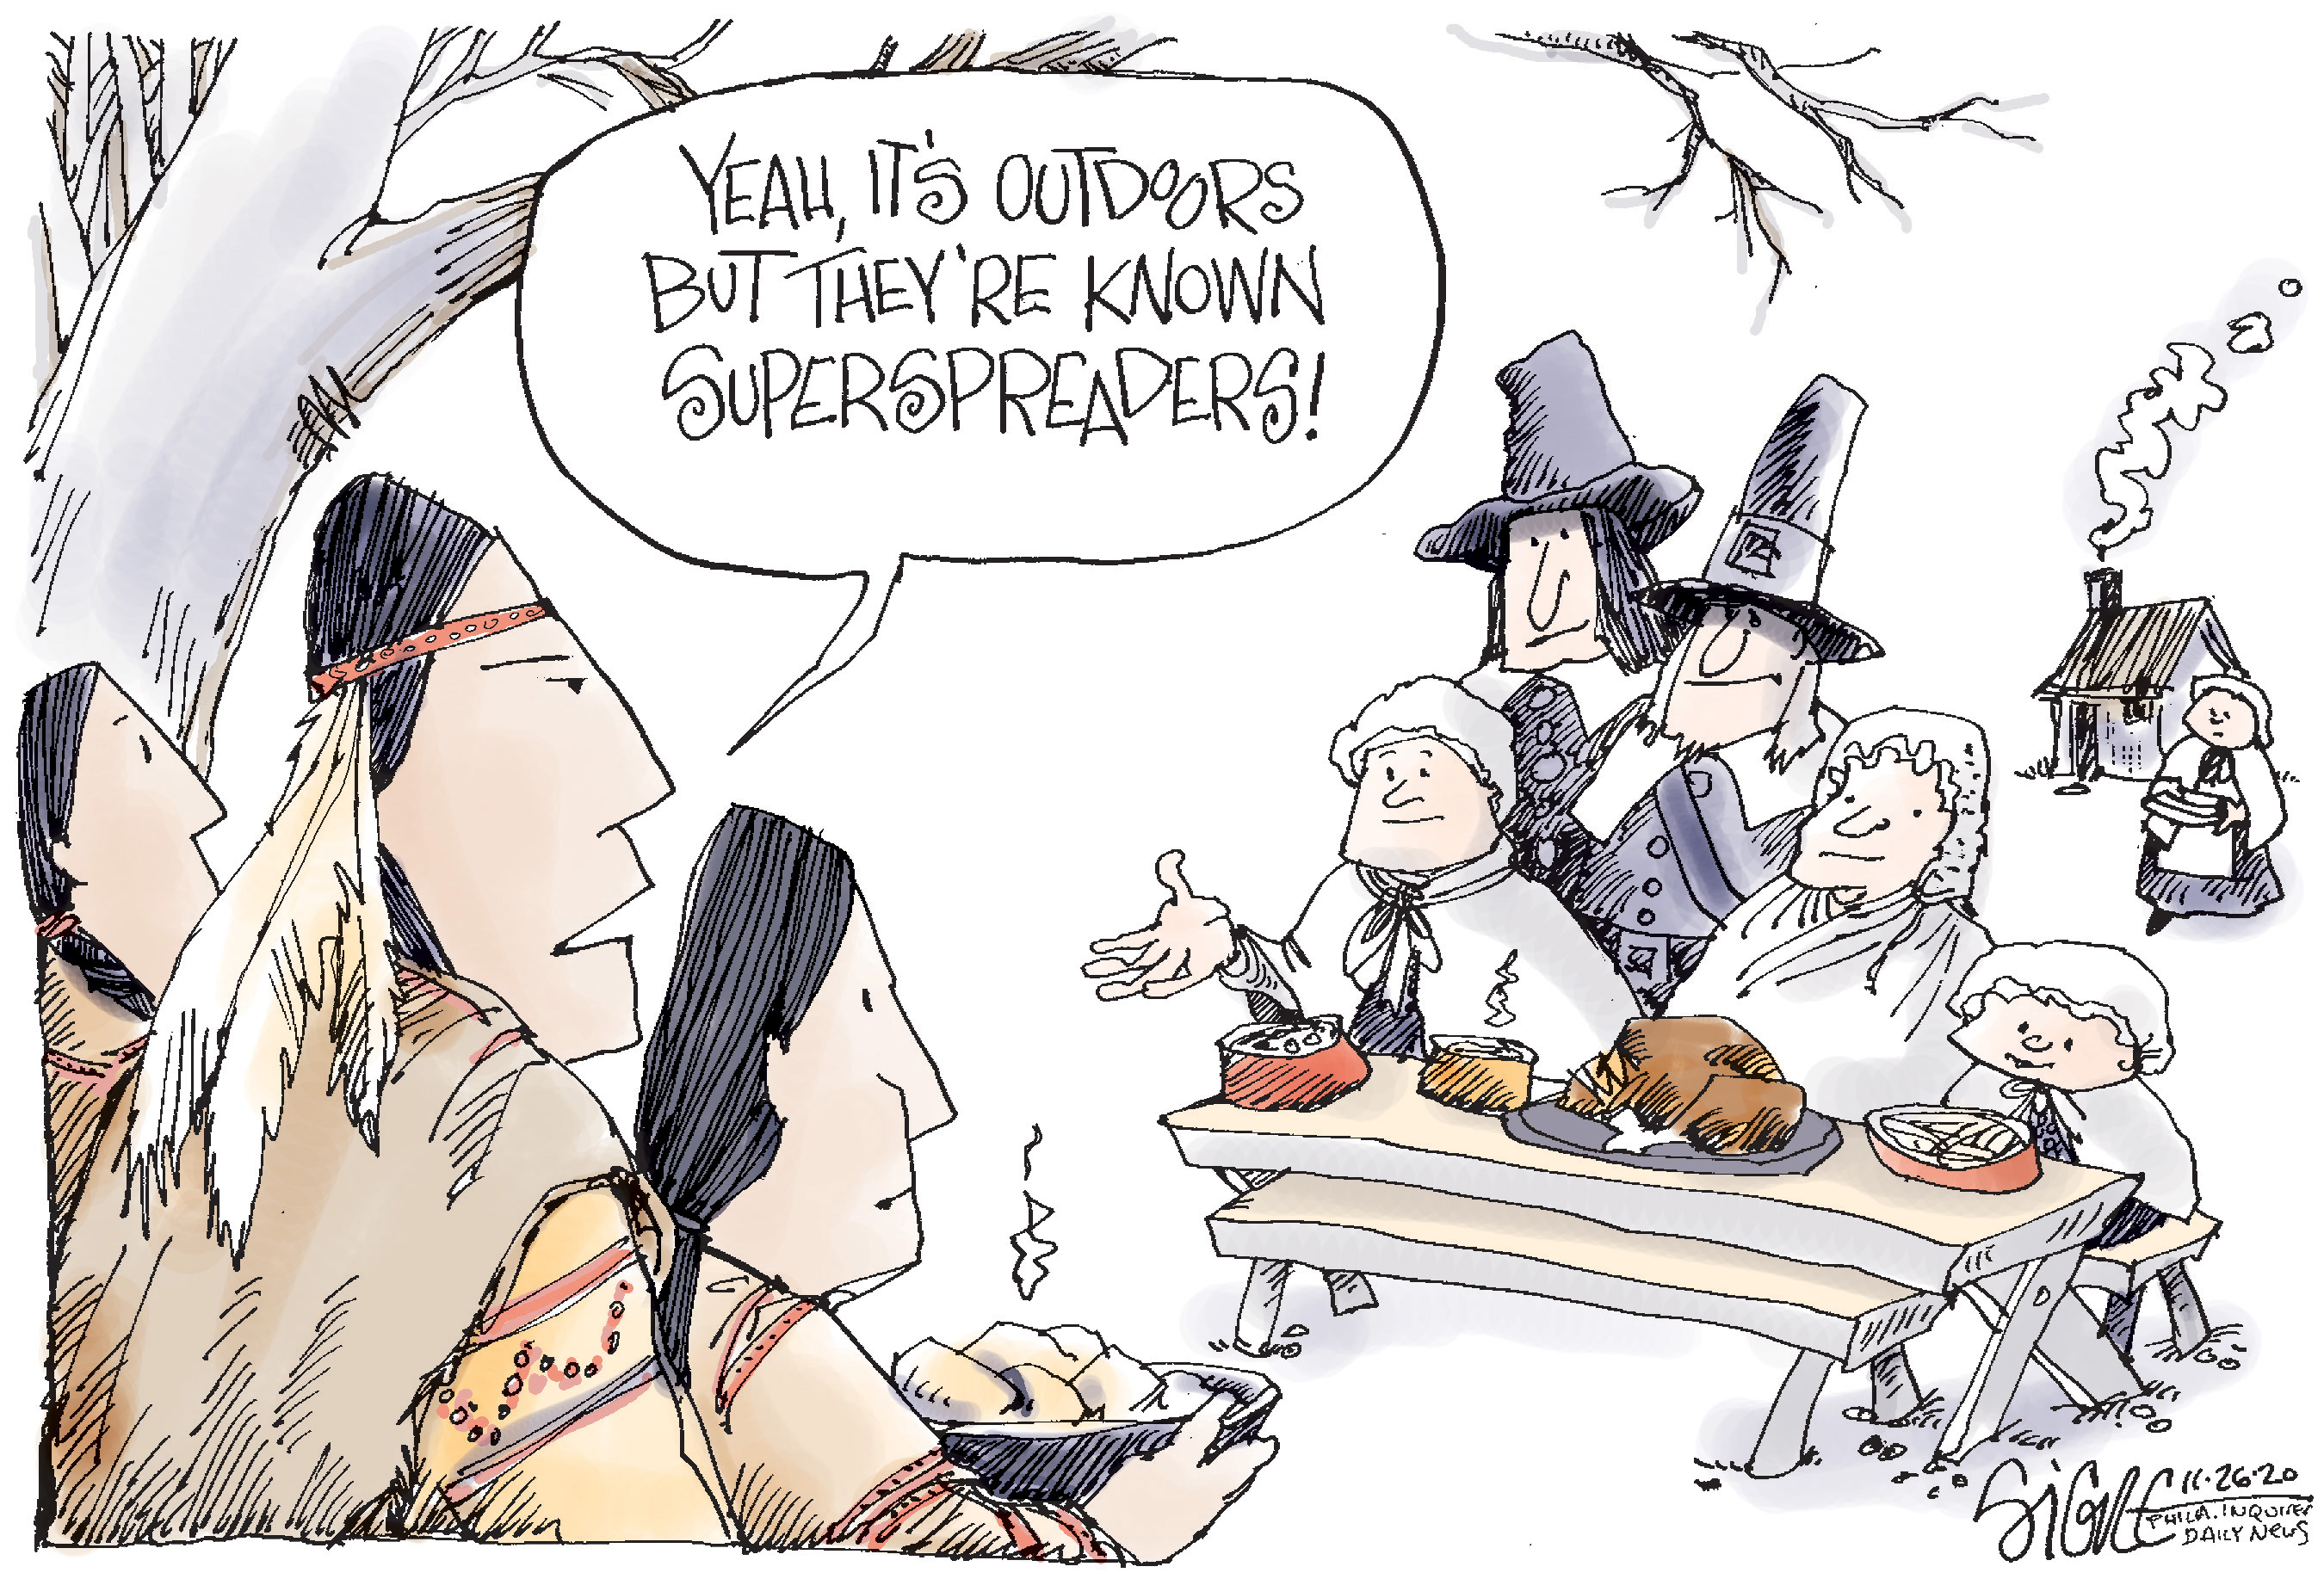 Political Cartoon: Early Thanksgiving superspreaders